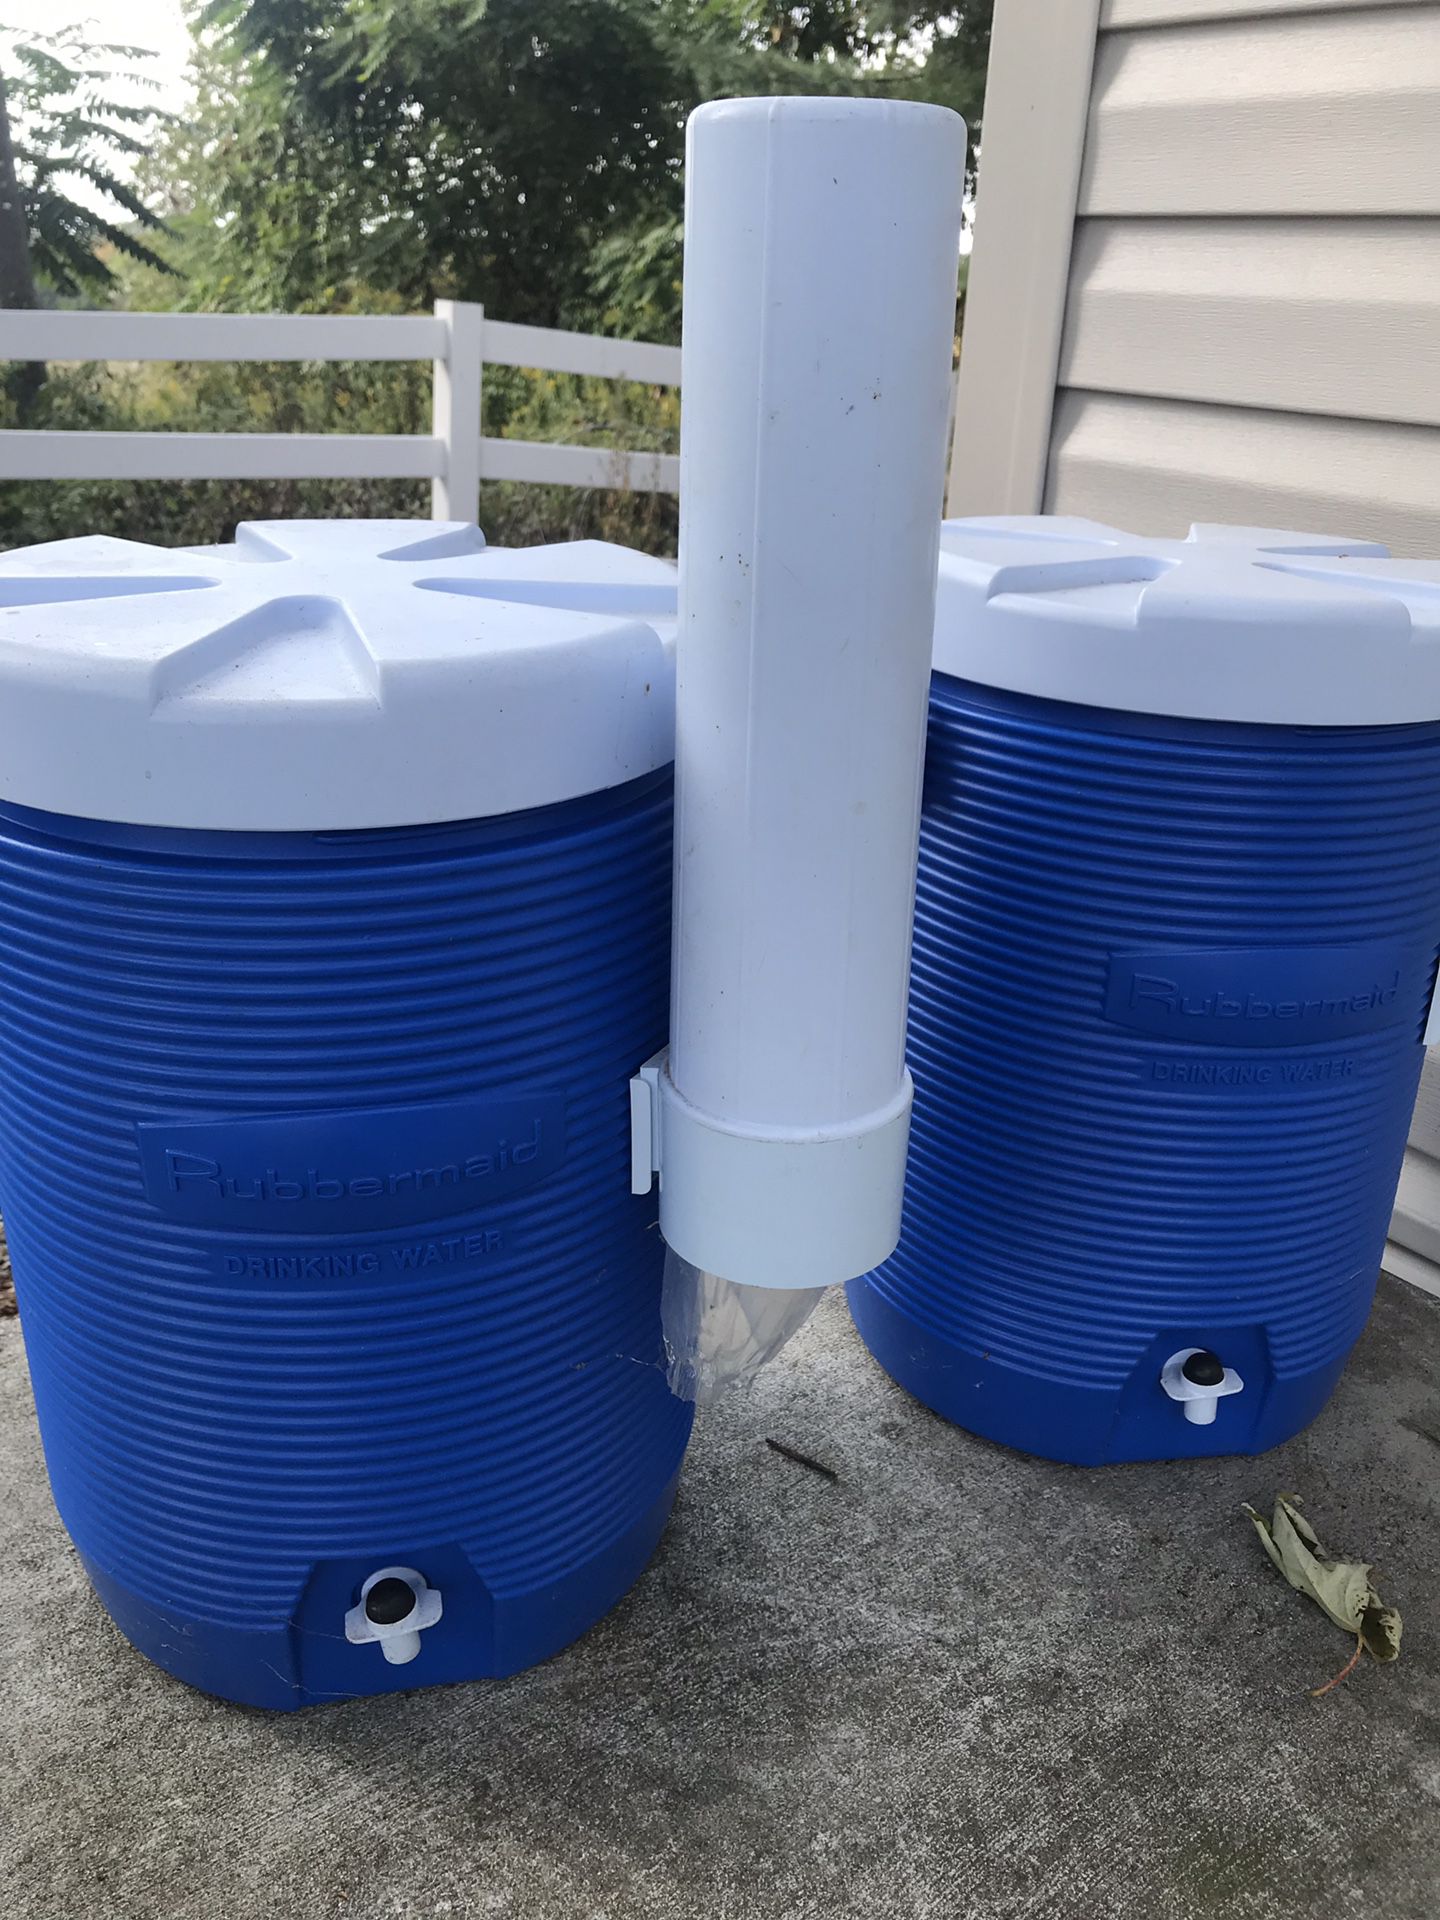 2 water coolers Rubbermaid